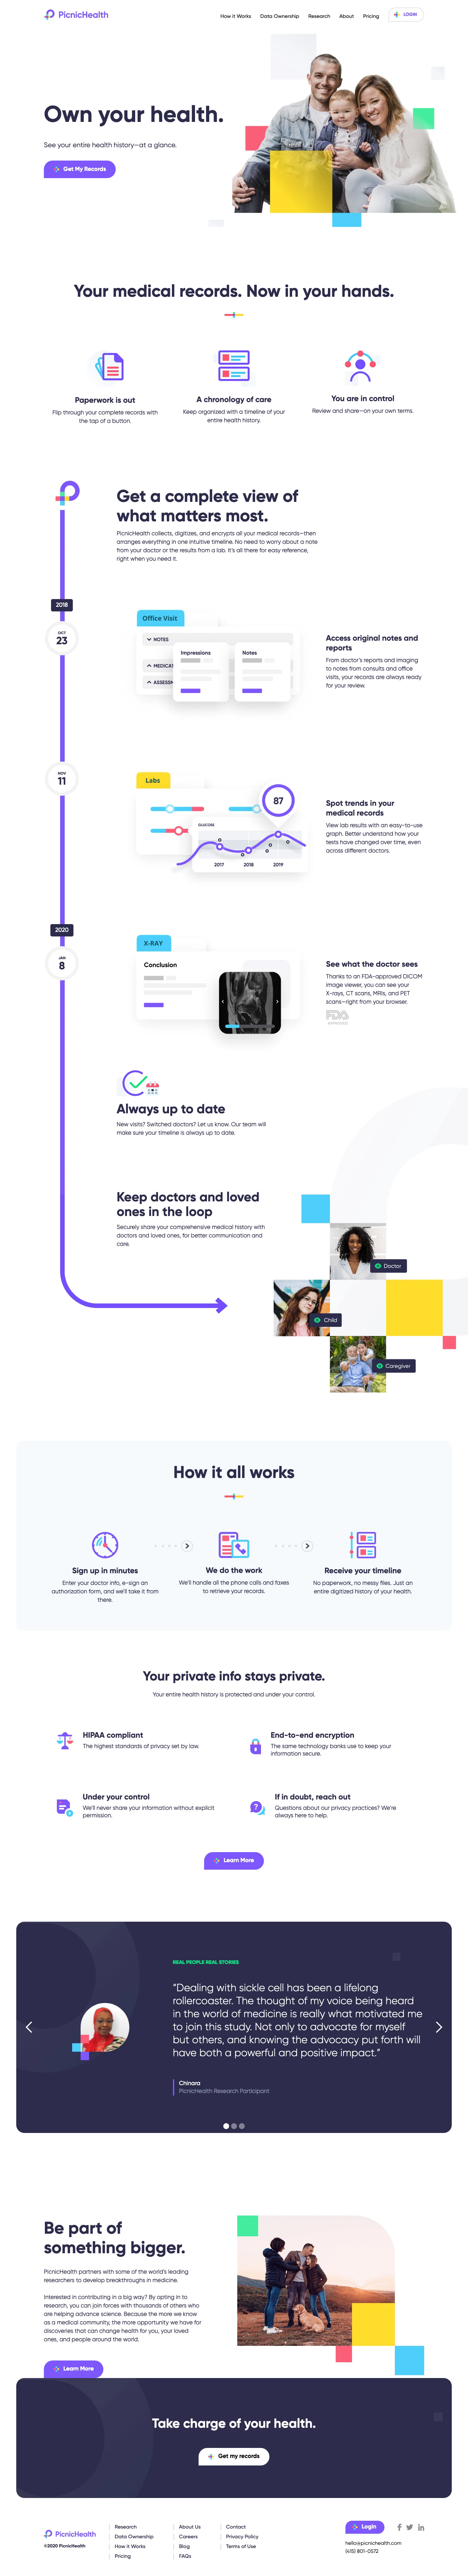 PicnicHealth Landing Page Example: We collect all your medical records in a secure, digital timeline. And we empower you to be part of something bigger by contributing to research, anonymously.